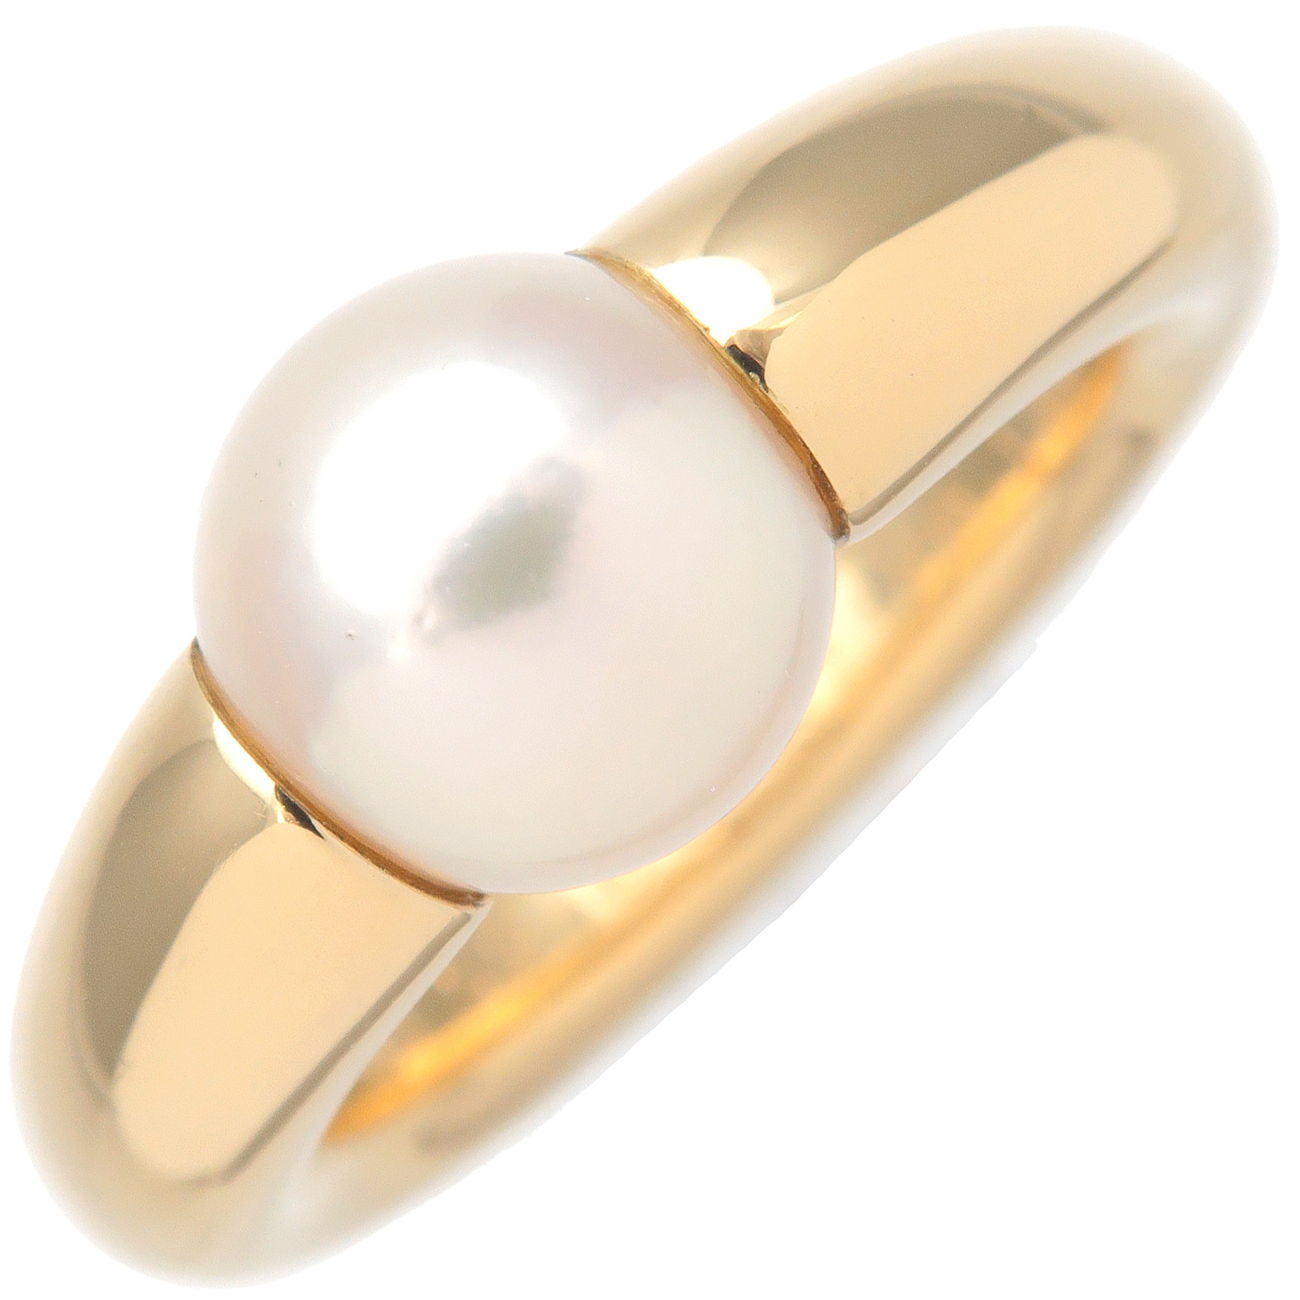 Louis Vuitton, Jewelry, Authentic Speedy Pearl Ring